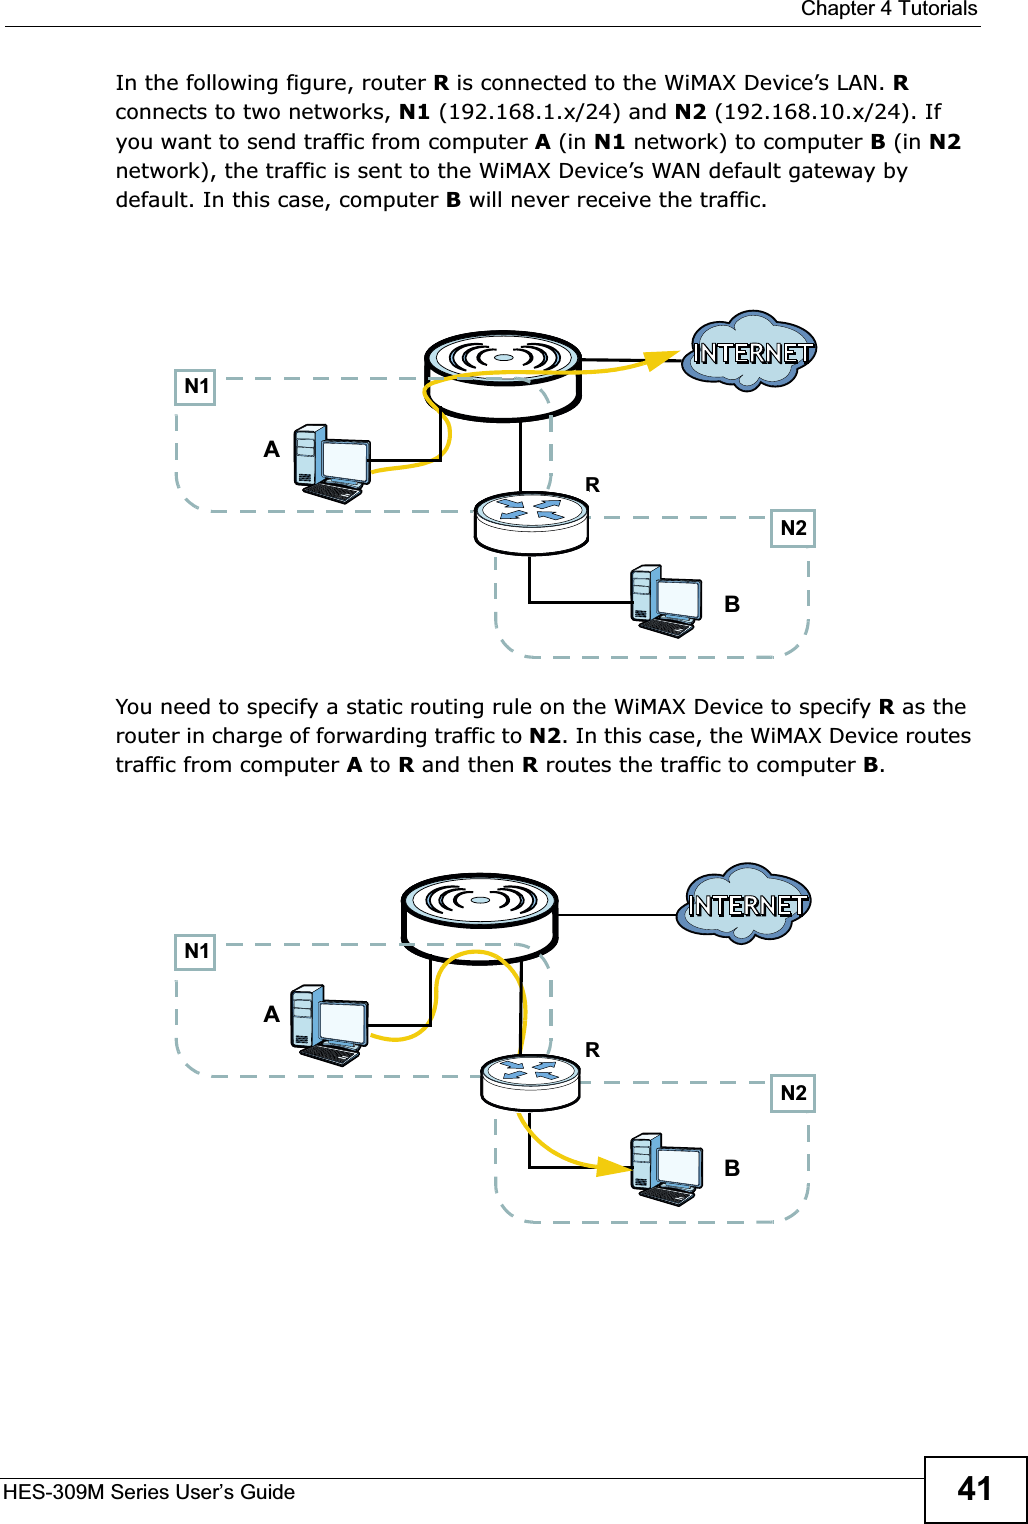  Chapter 4 TutorialsHES-309M Series User’s Guide 41In the following figure, router R is connected to the WiMAX Device’s LAN. Rconnects to two networks, N1 (192.168.1.x/24) and N2 (192.168.10.x/24). If you want to send traffic from computer A (in N1 network) to computer B (in N2network), the traffic is sent to the WiMAX Device’s WAN default gateway by default. In this case, computer B will never receive the traffic.You need to specify a static routing rule on the WiMAX Device to specify R as the router in charge of forwarding traffic to N2. In this case, the WiMAX Device routes traffic from computer A to R and then R routes the traffic to computer B.N2BARN1N2BN1AR